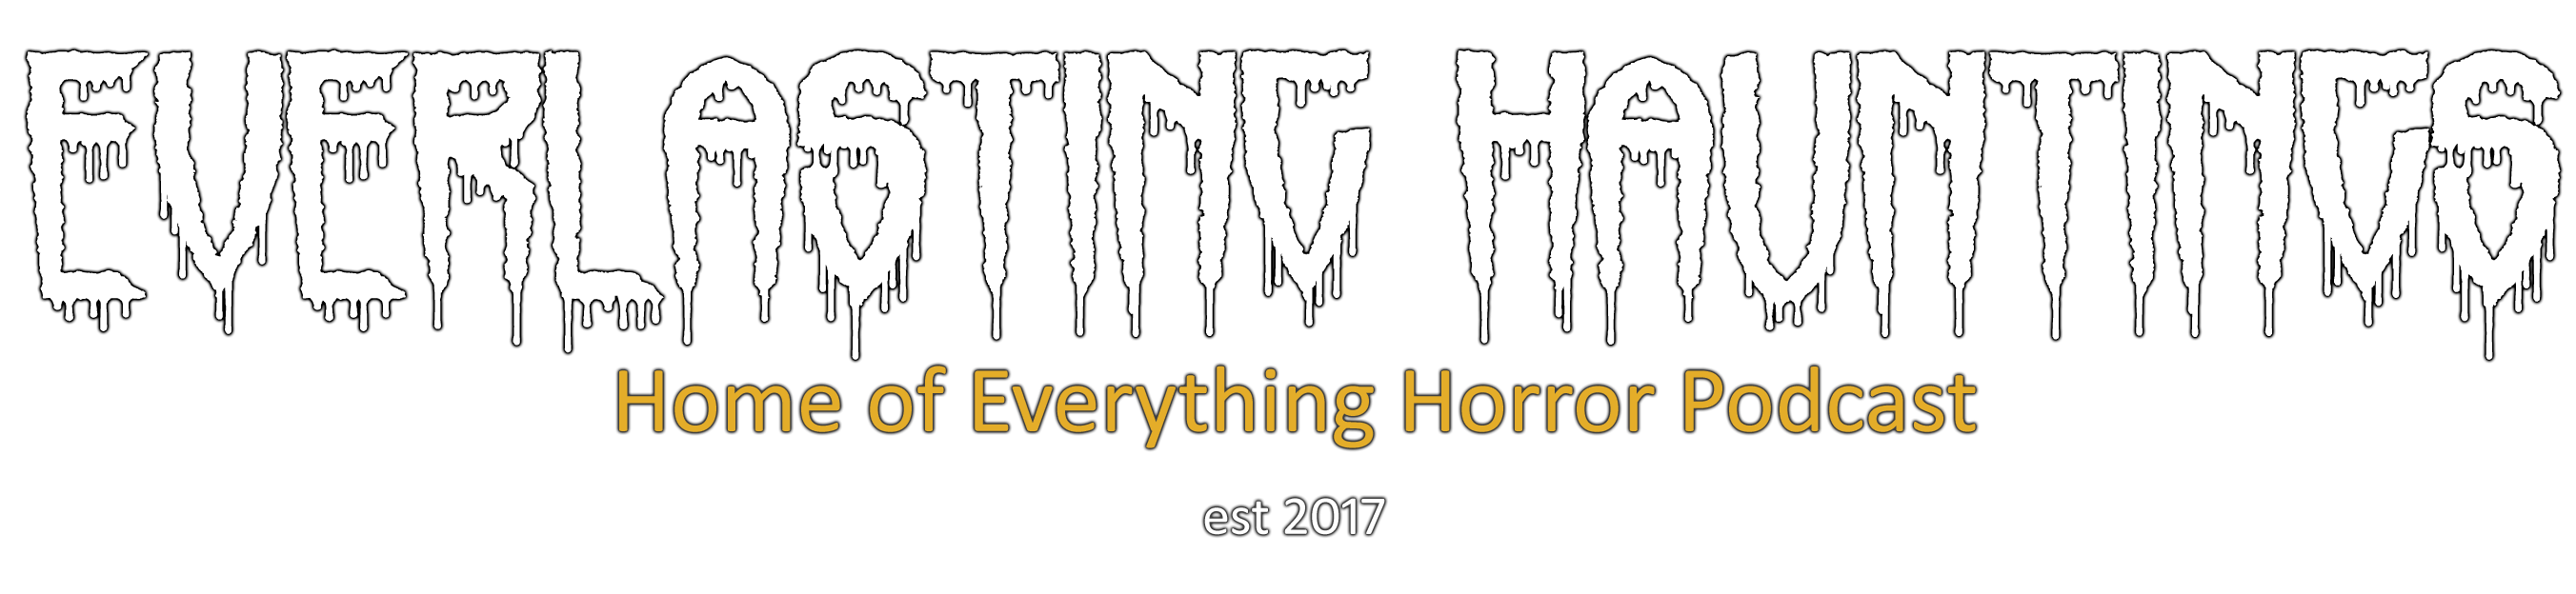 Everlasting Hauntings // Everything Horror Podcast – Official Website